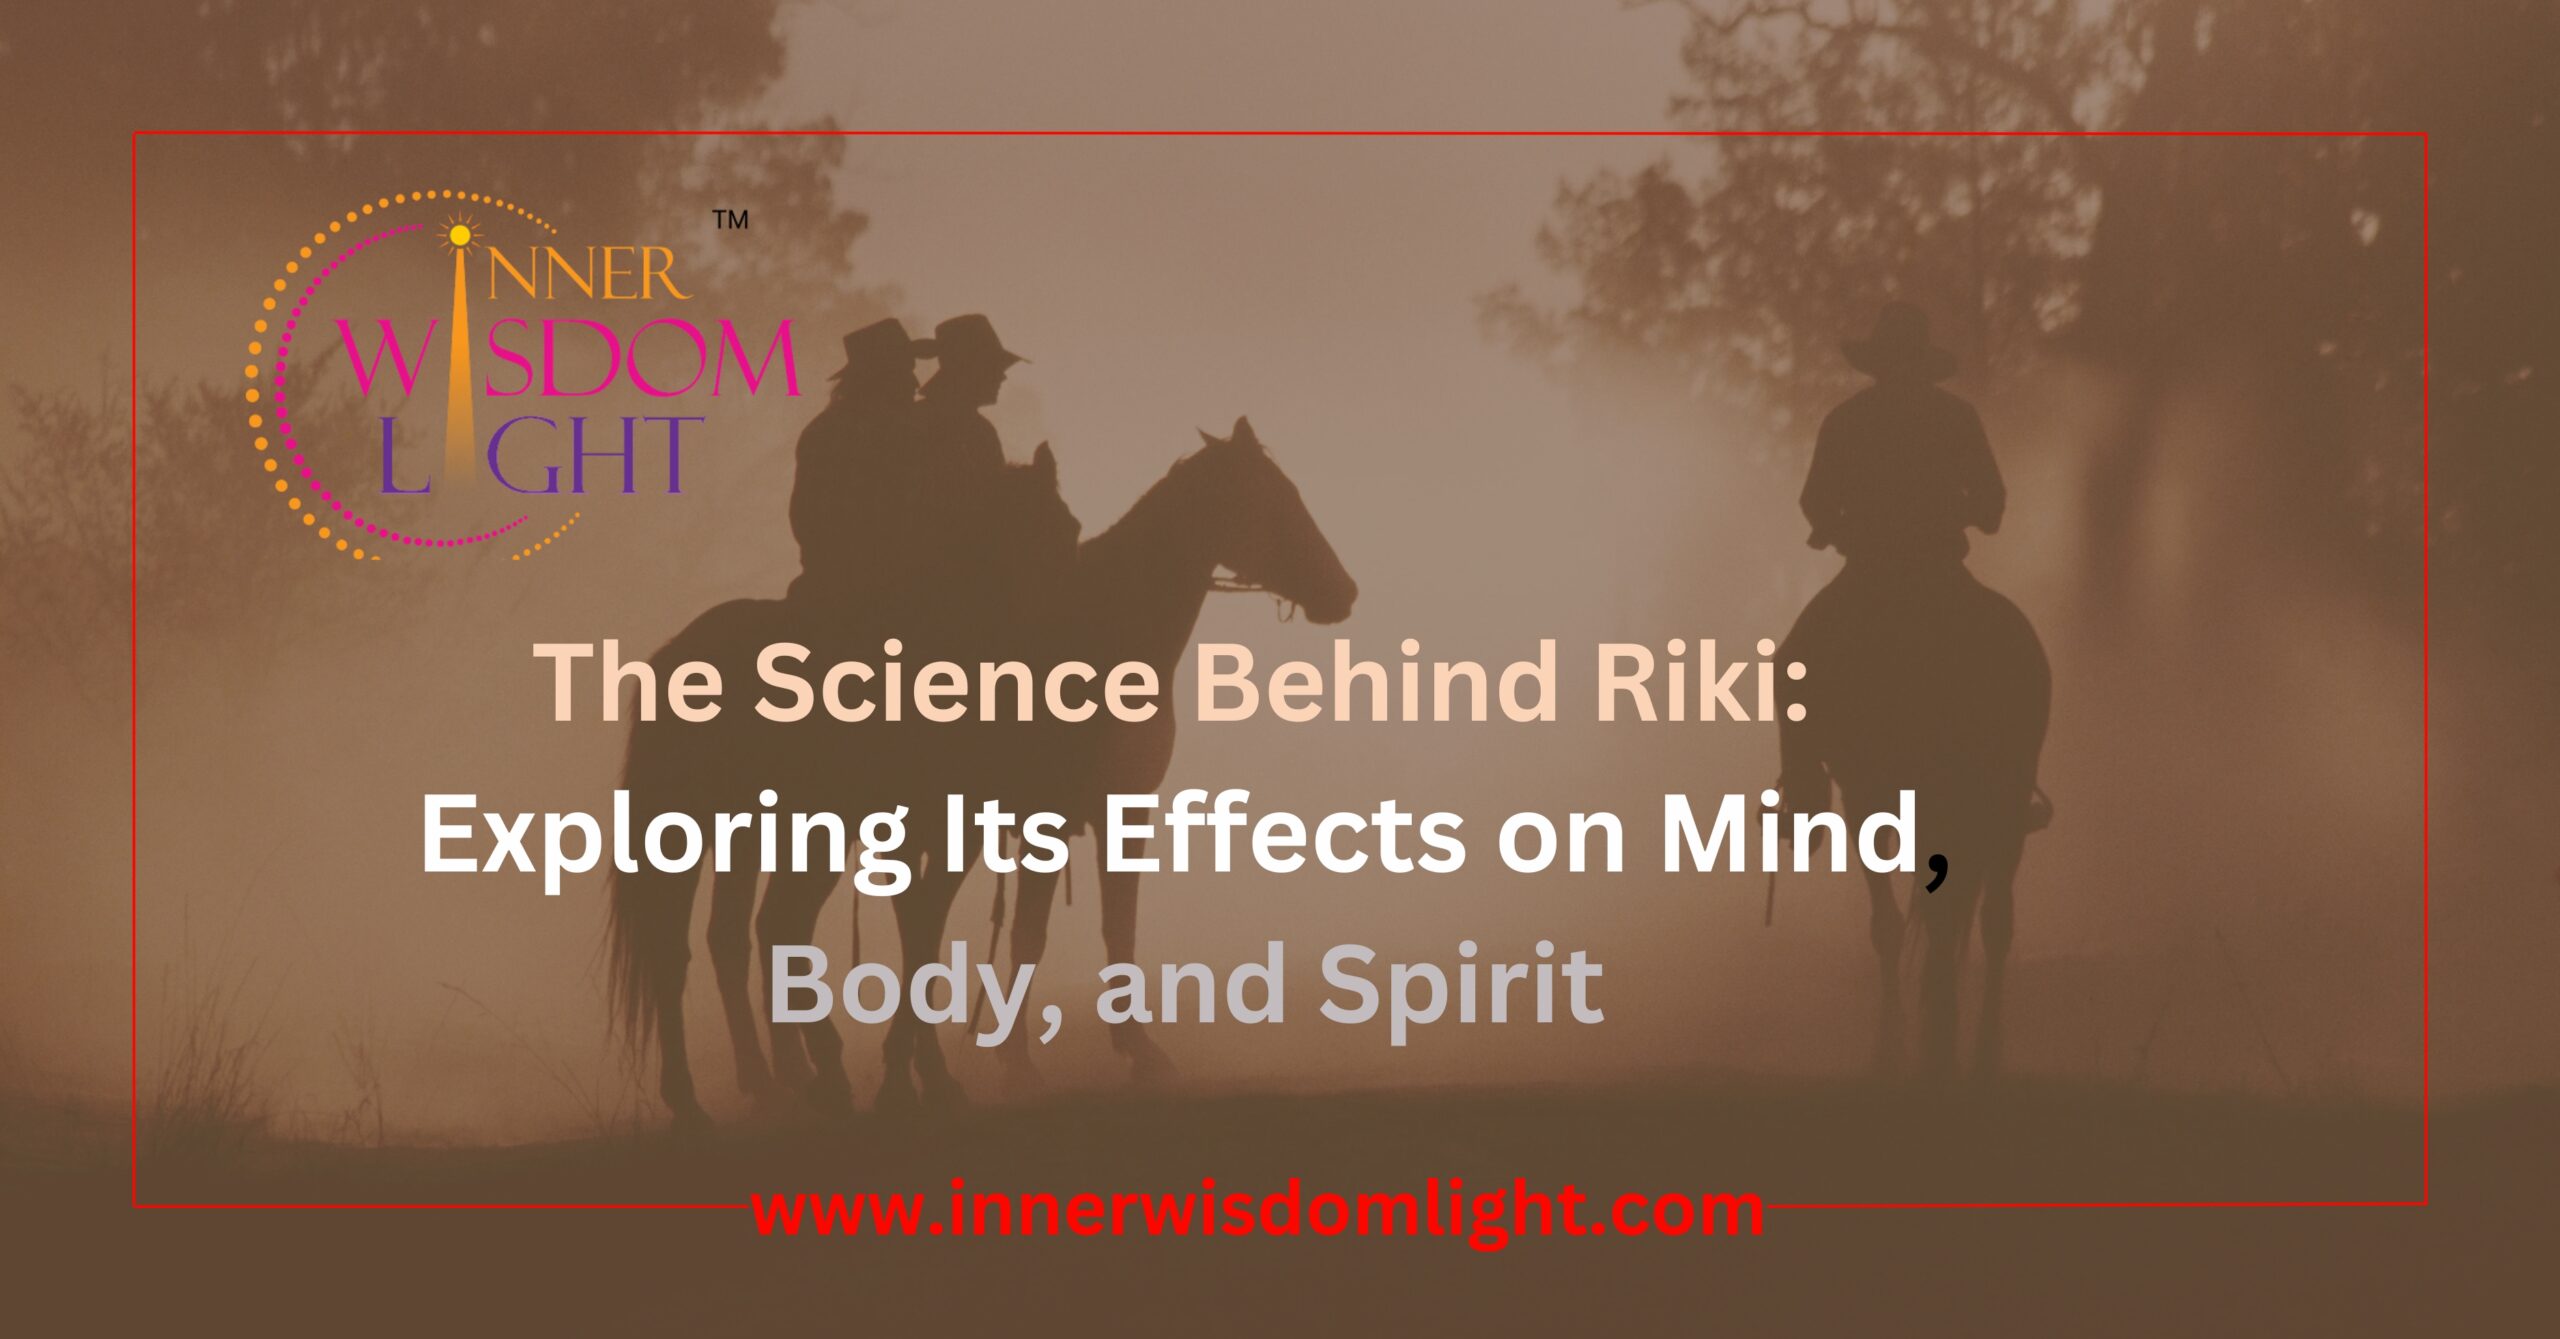 The Science Behind Riki: Exploring Its Effects on Mind, Body, and Spirit